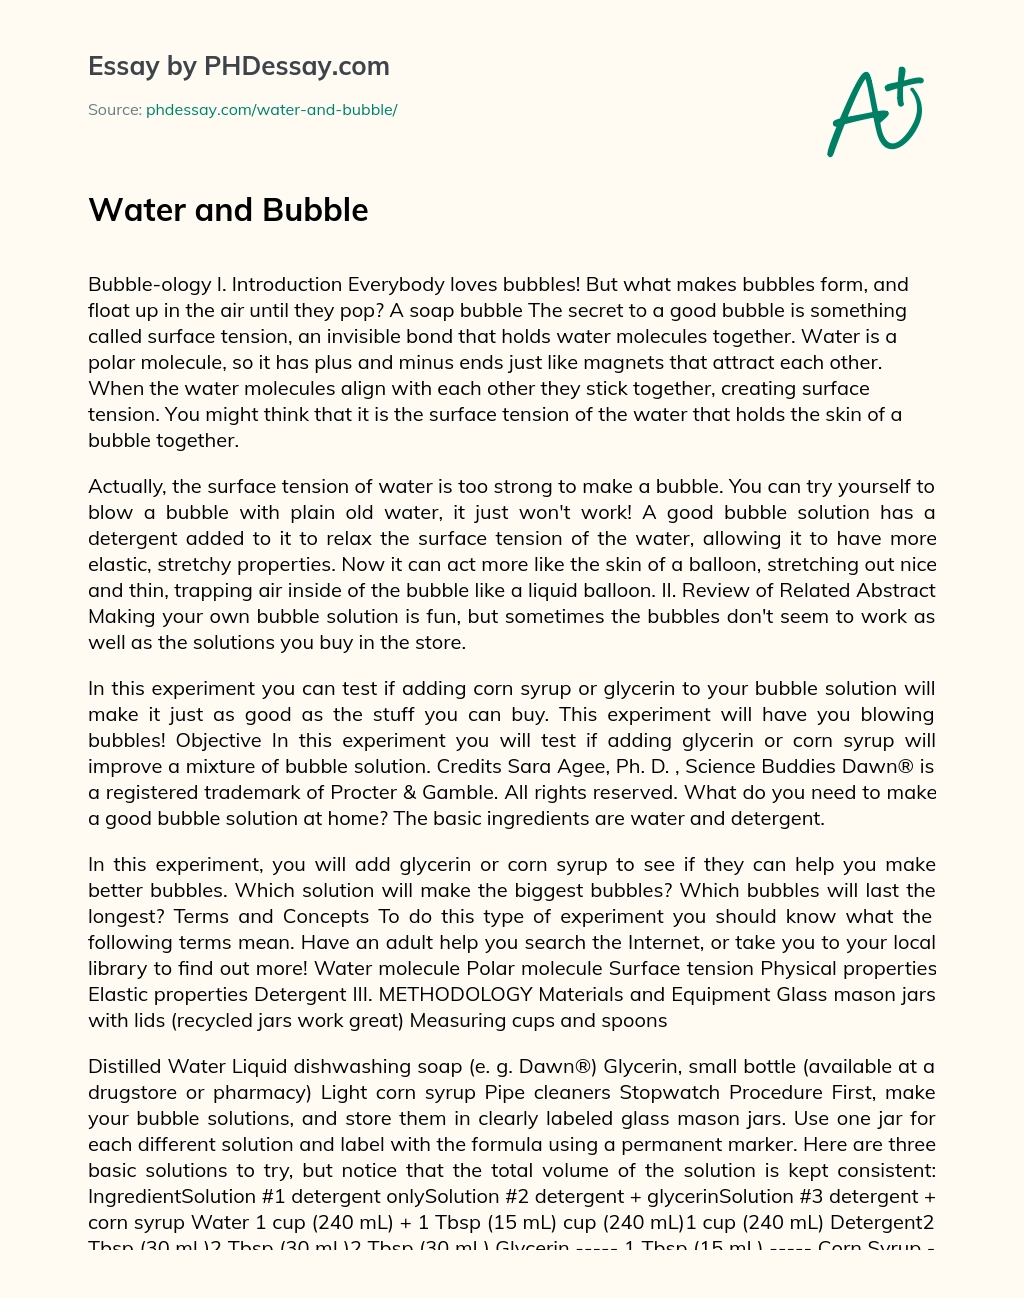 Water and Bubble essay